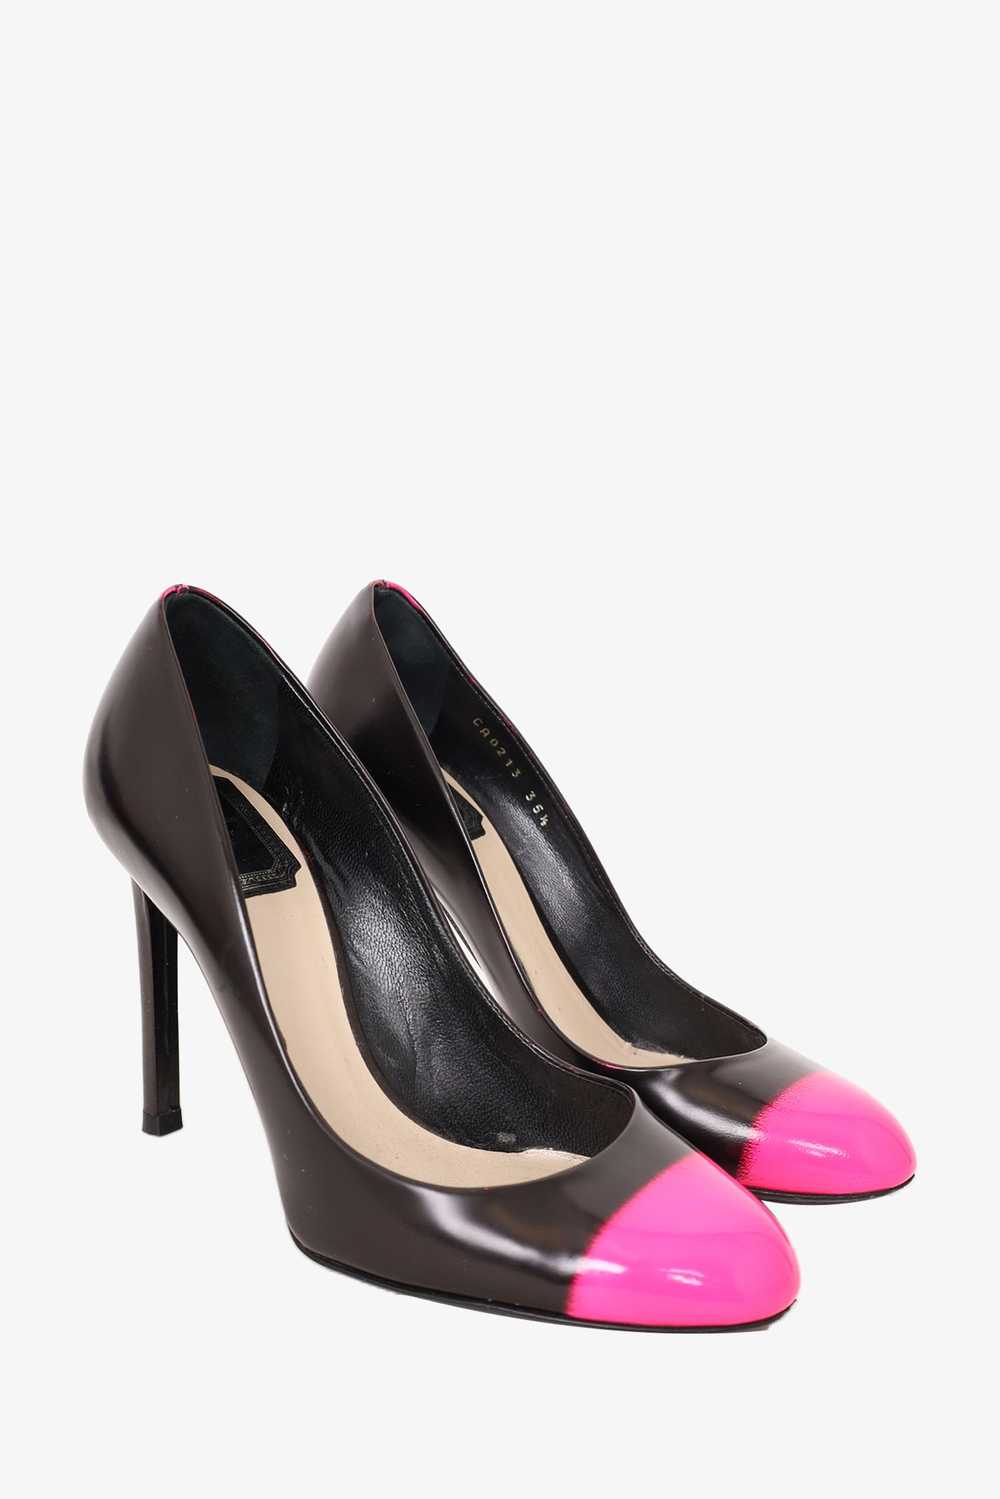 Christian Dior Black with Neon Pink Toe Leather P… - image 2